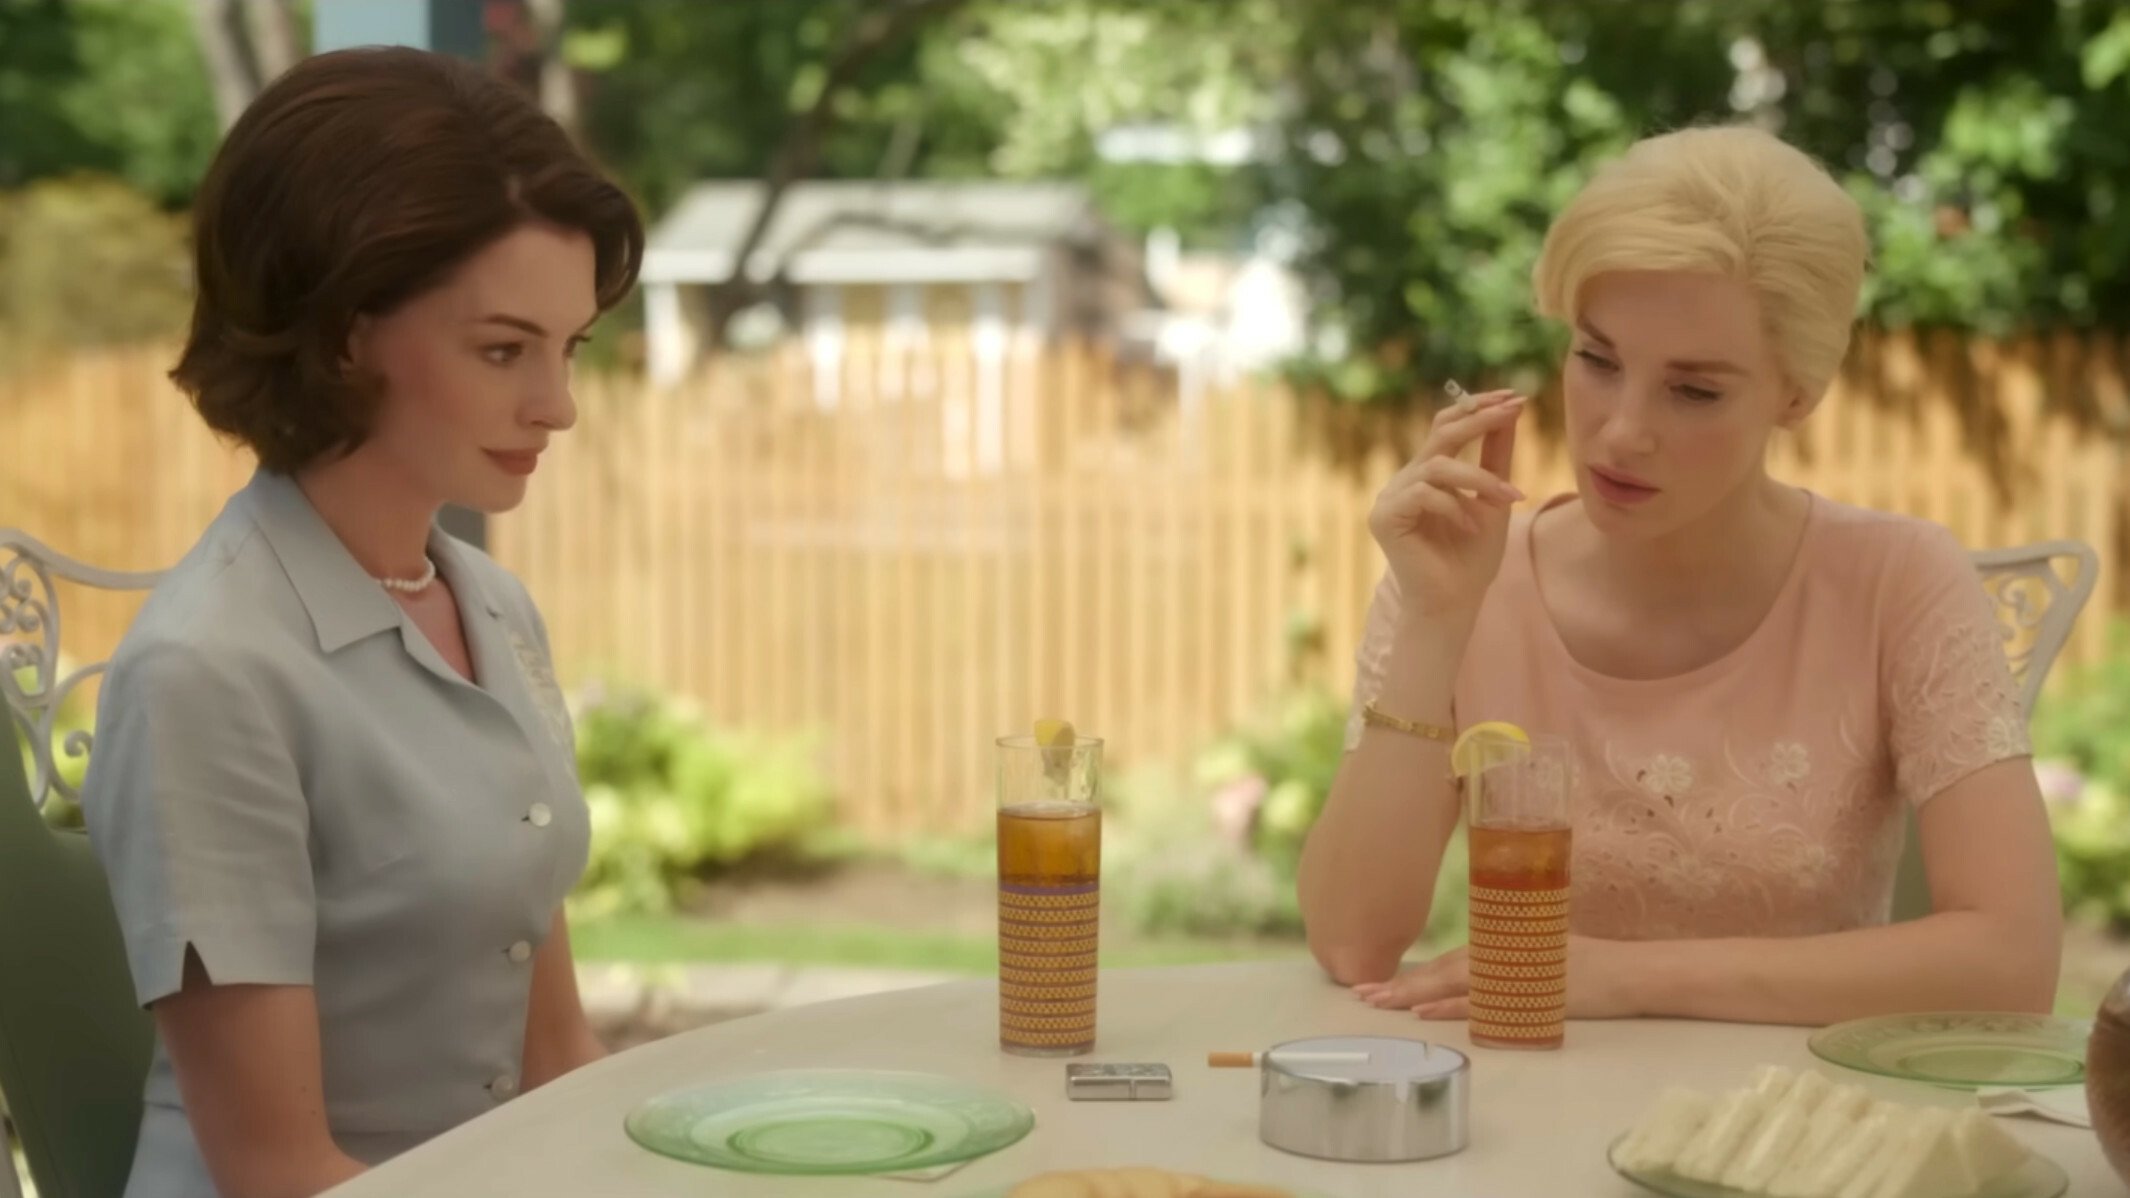 Anne Hathaway and Jessica Chastain are clashing '60s housewives in trailer for 'Mothers' Instinct'